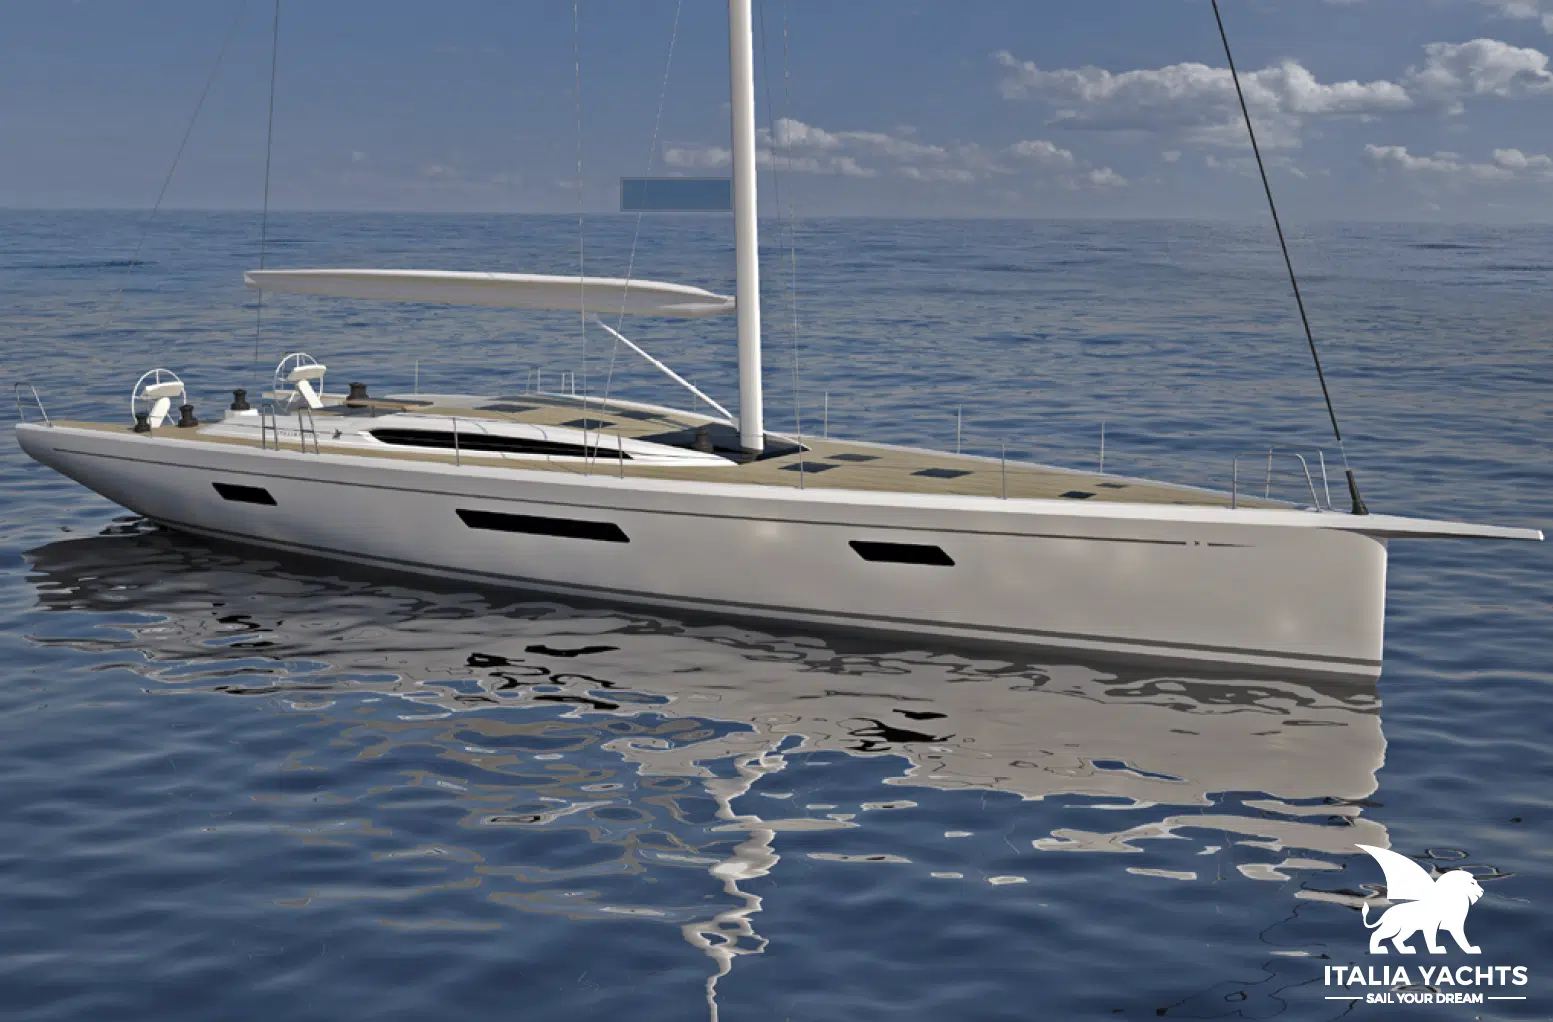 The new Italia Yachts 20.98 presented at Cannes